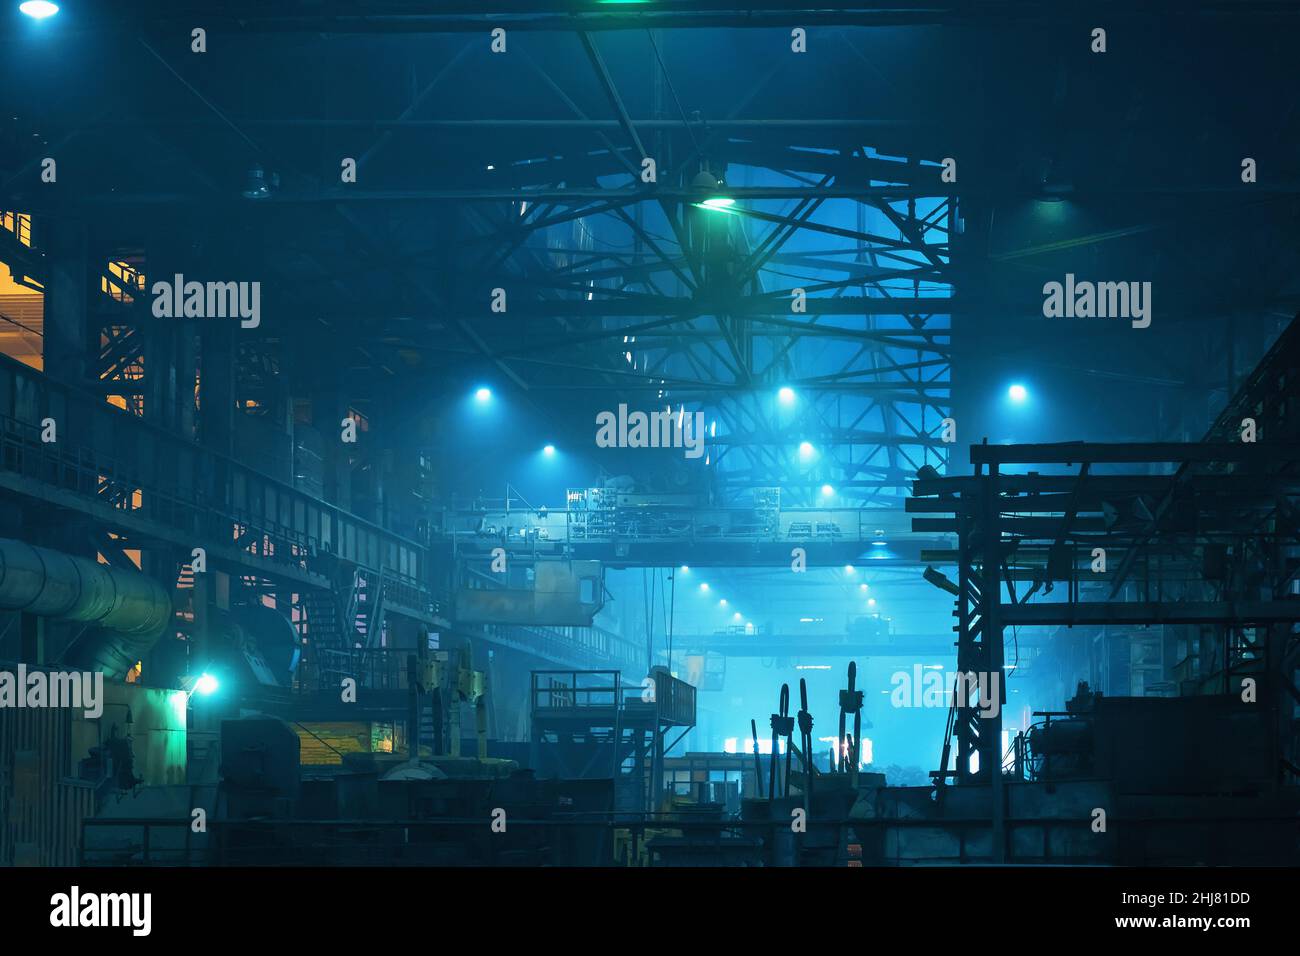 Interior of big industrial building inside in blue color. Factory hangar or workshop with steel constructions. Metallurgy plant. heavy industry. Stock Photo